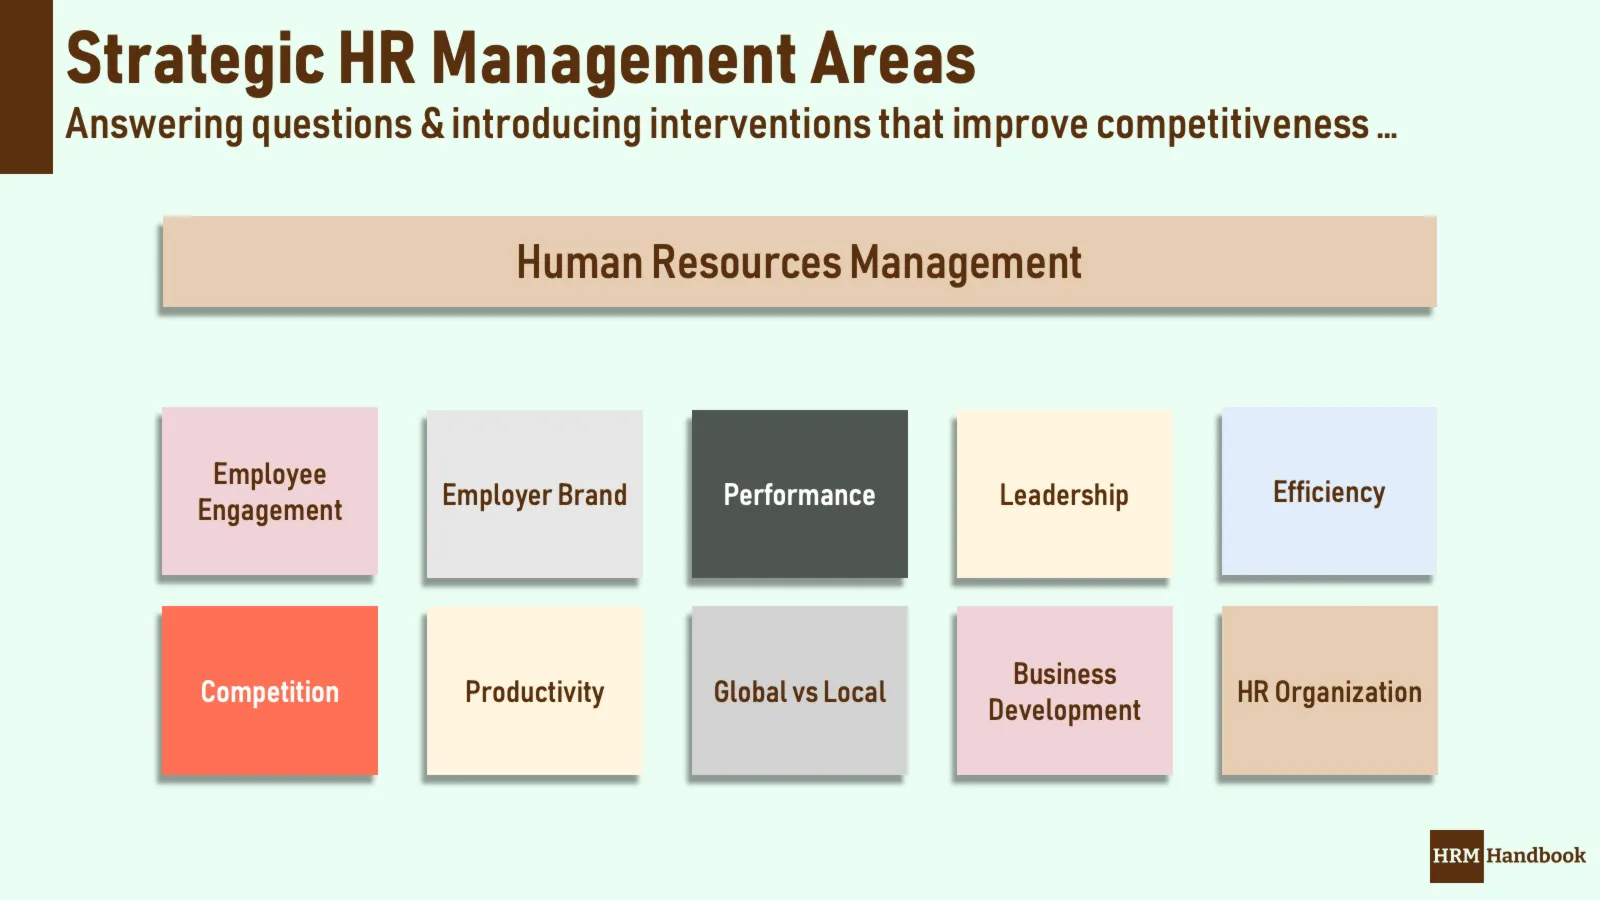 HR Management Areas covered by HRM Handbook